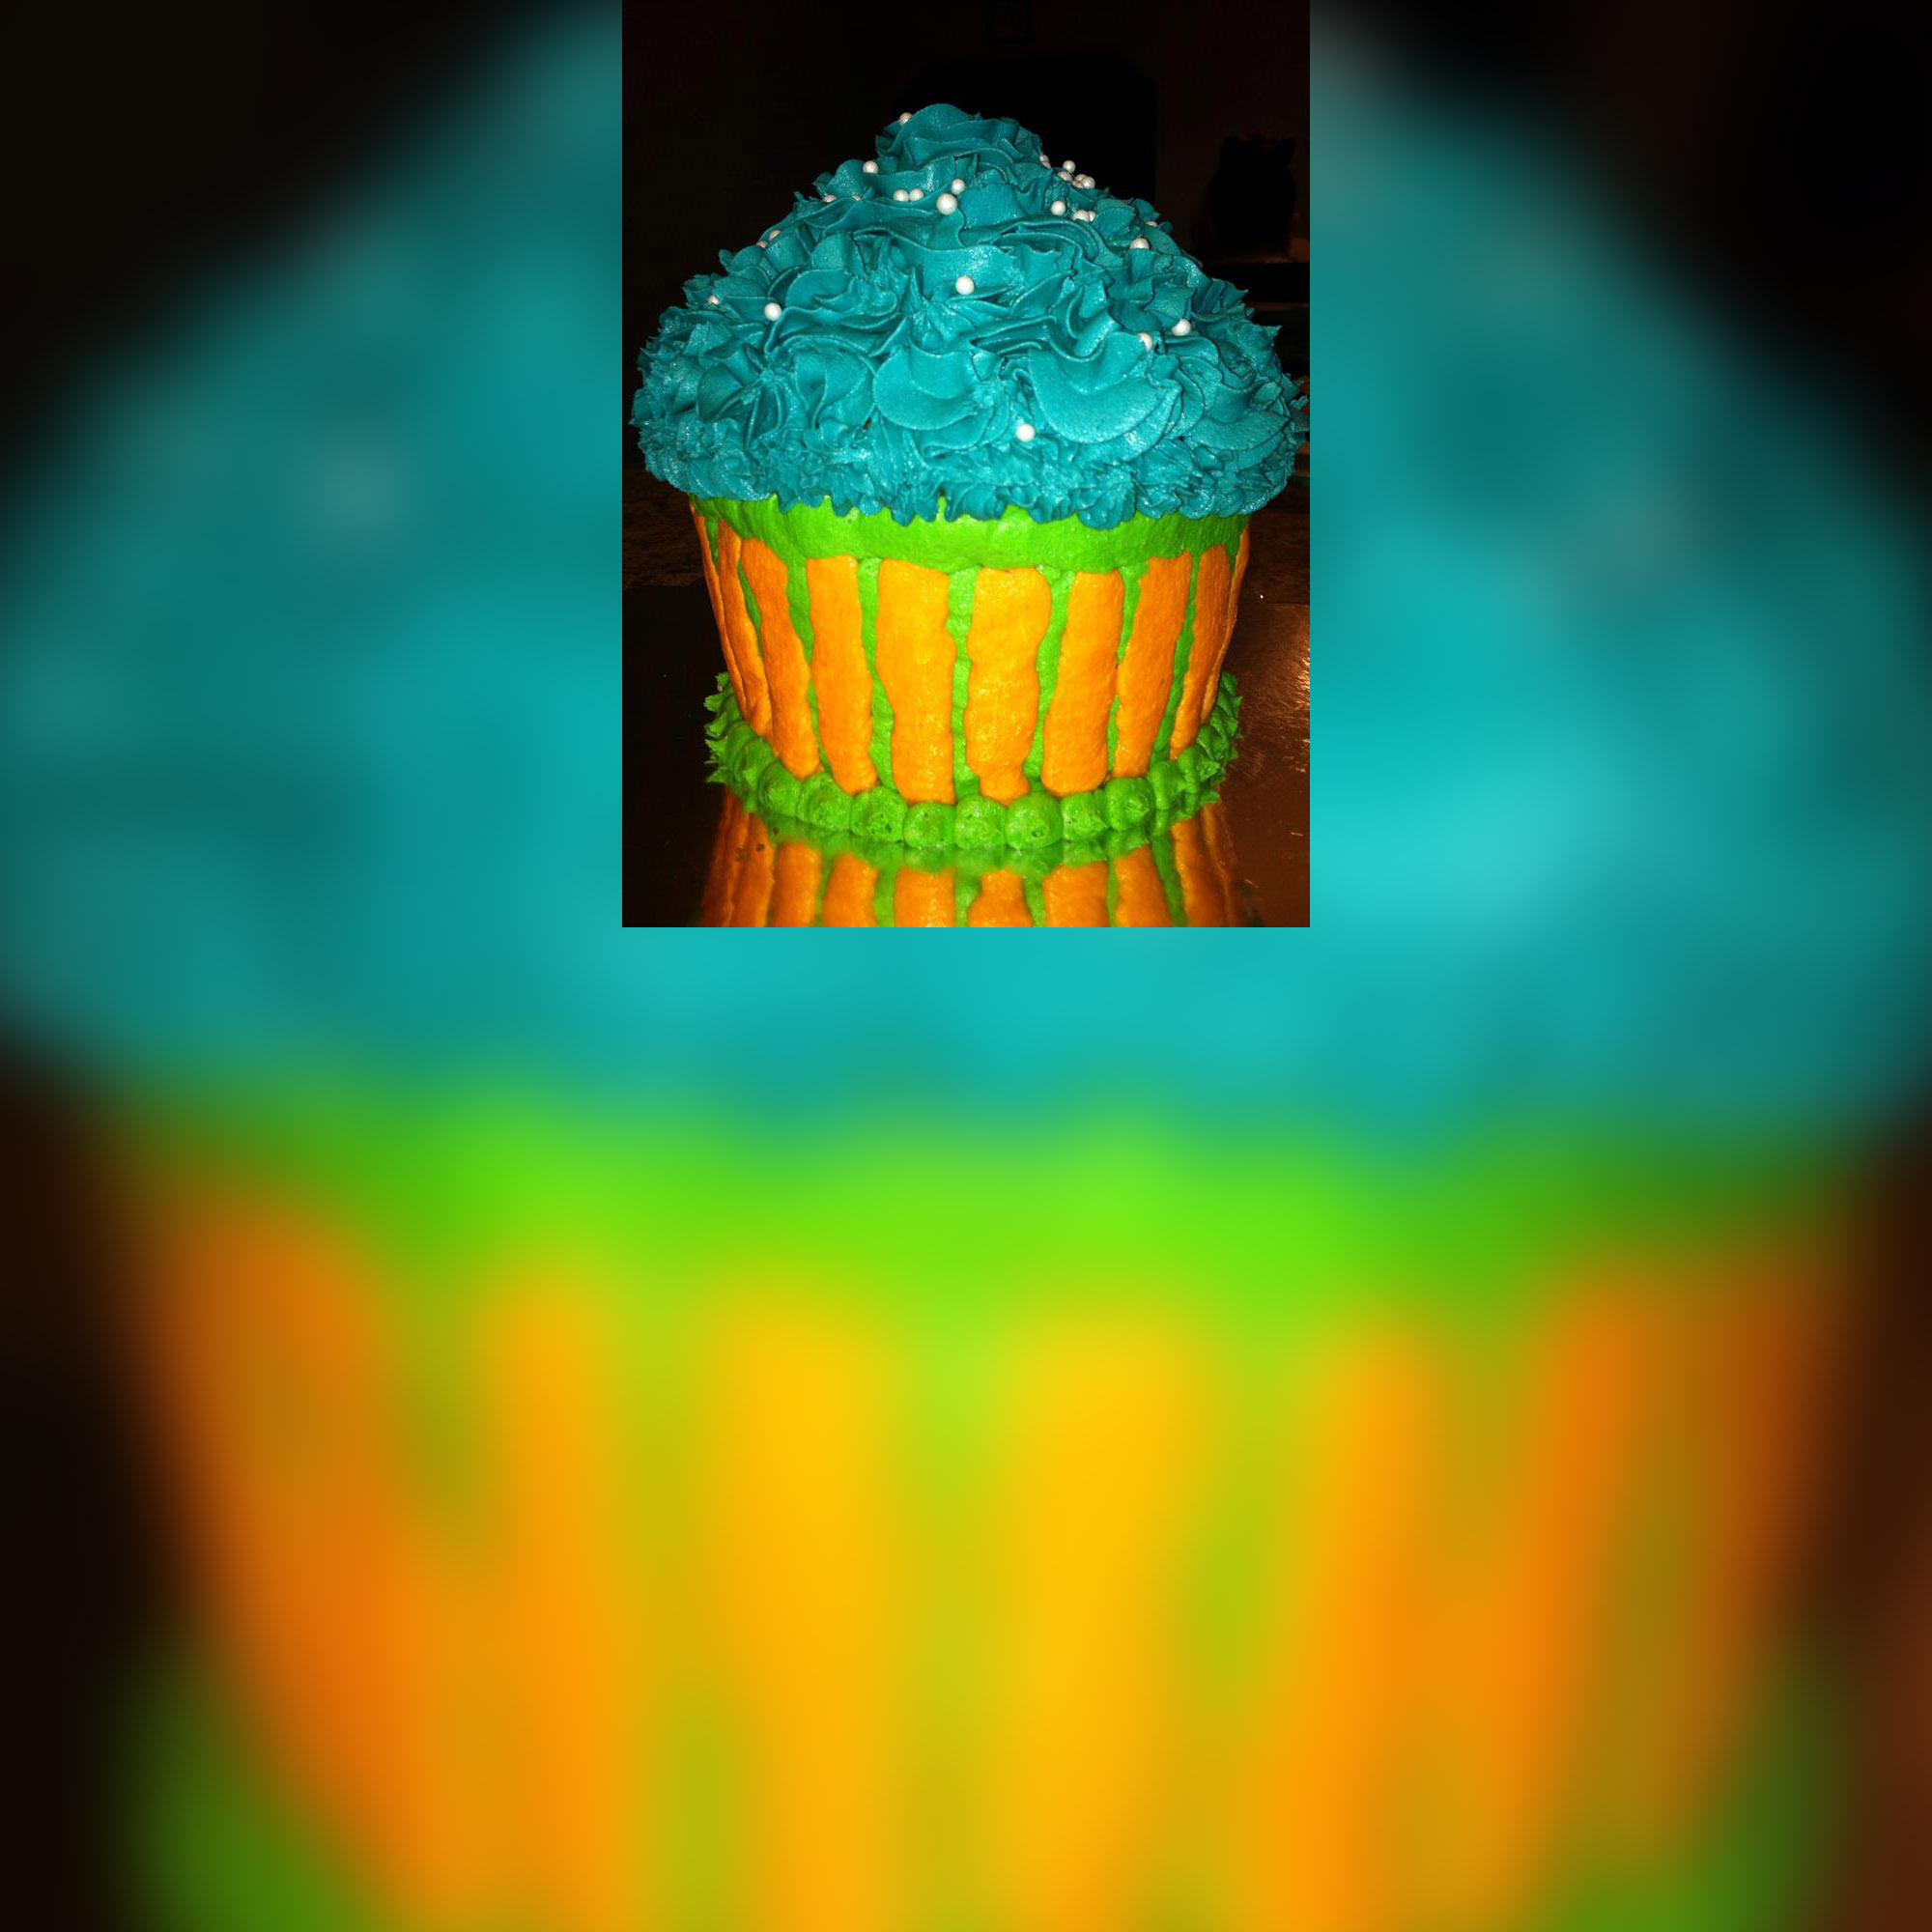 PHOTO: A cake-sized cupcake made by Chloe Stirling.